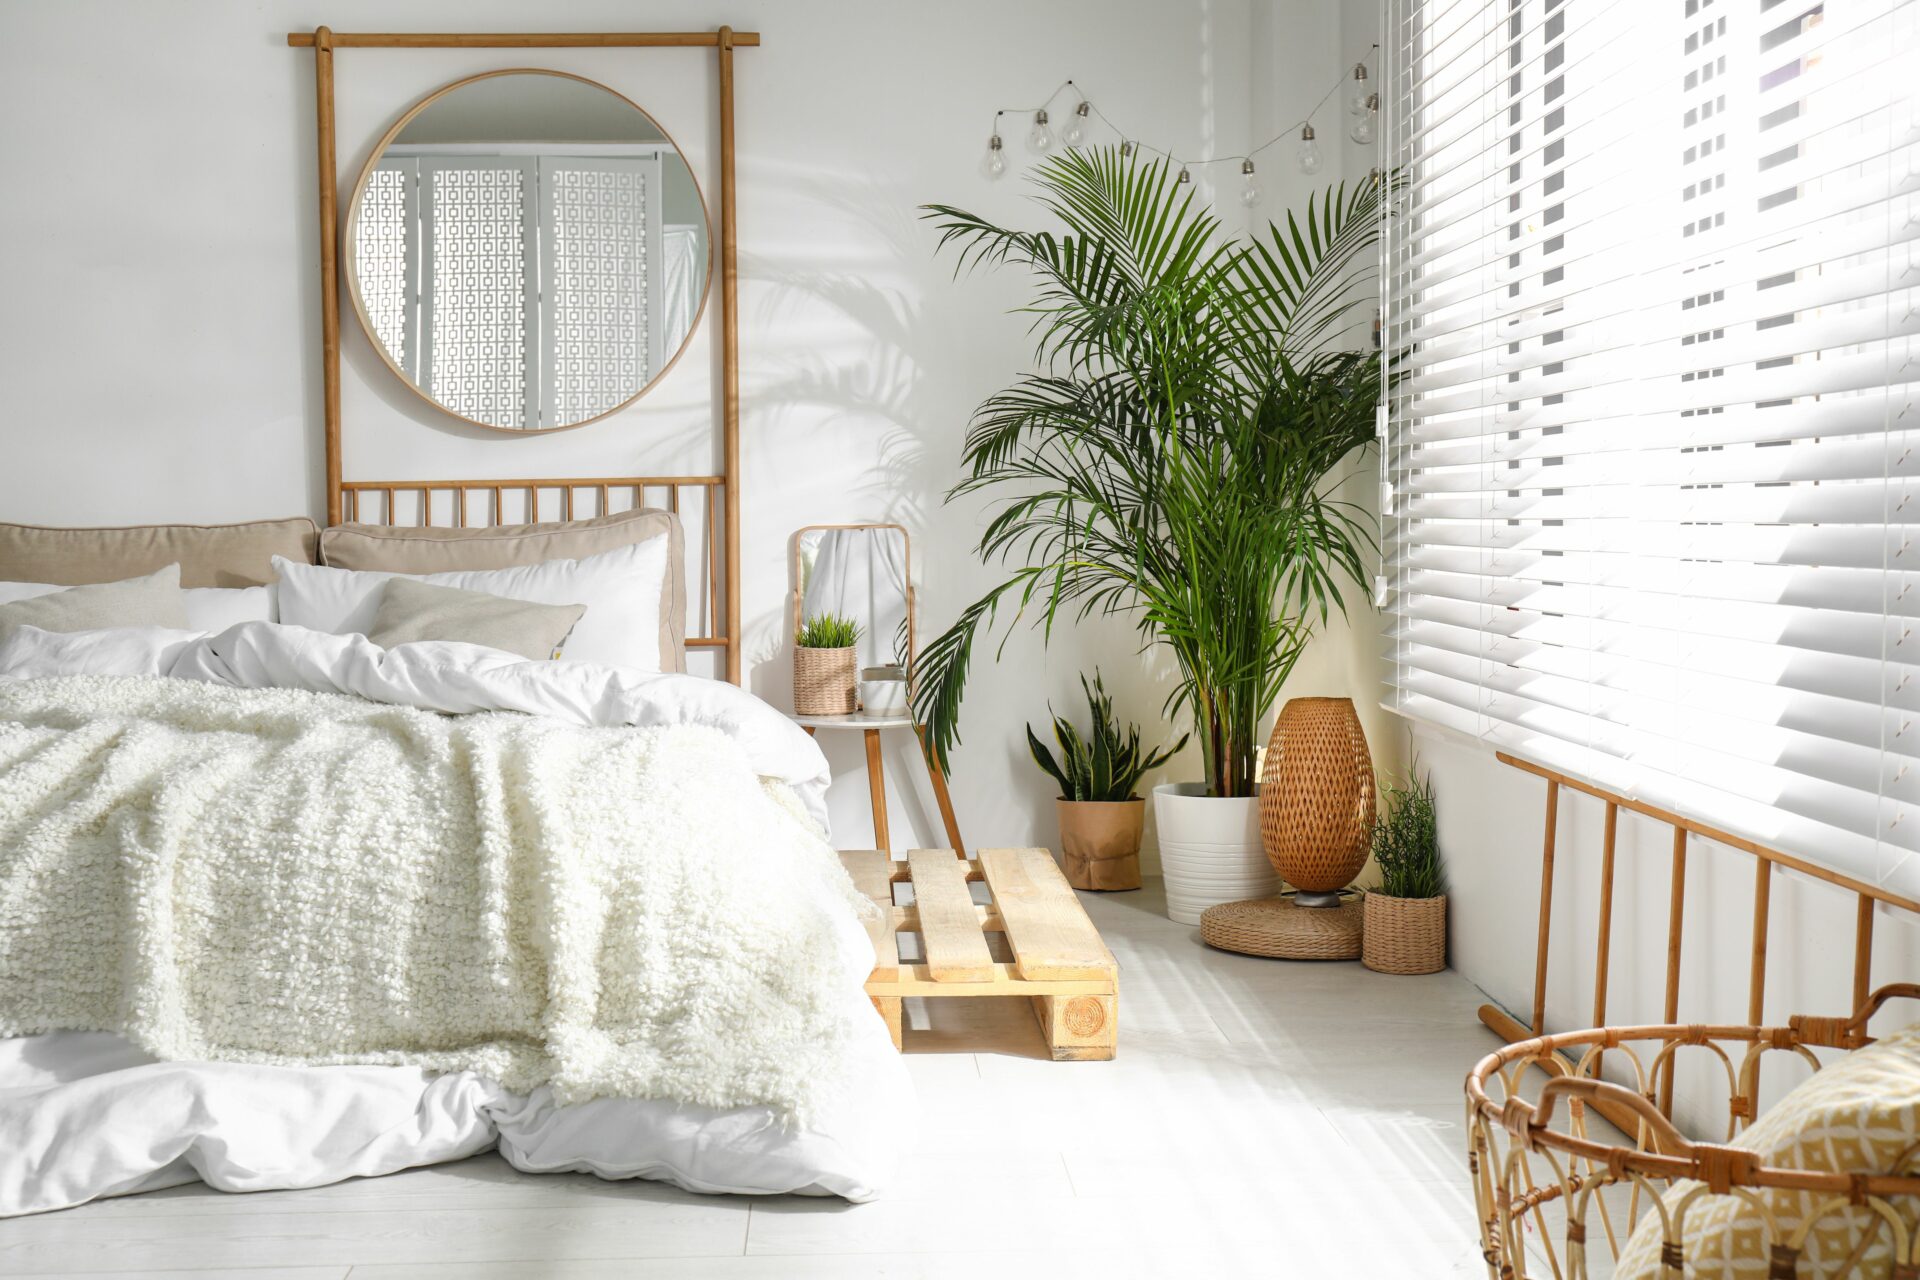 Boho Chic inspiration with blinds and shades